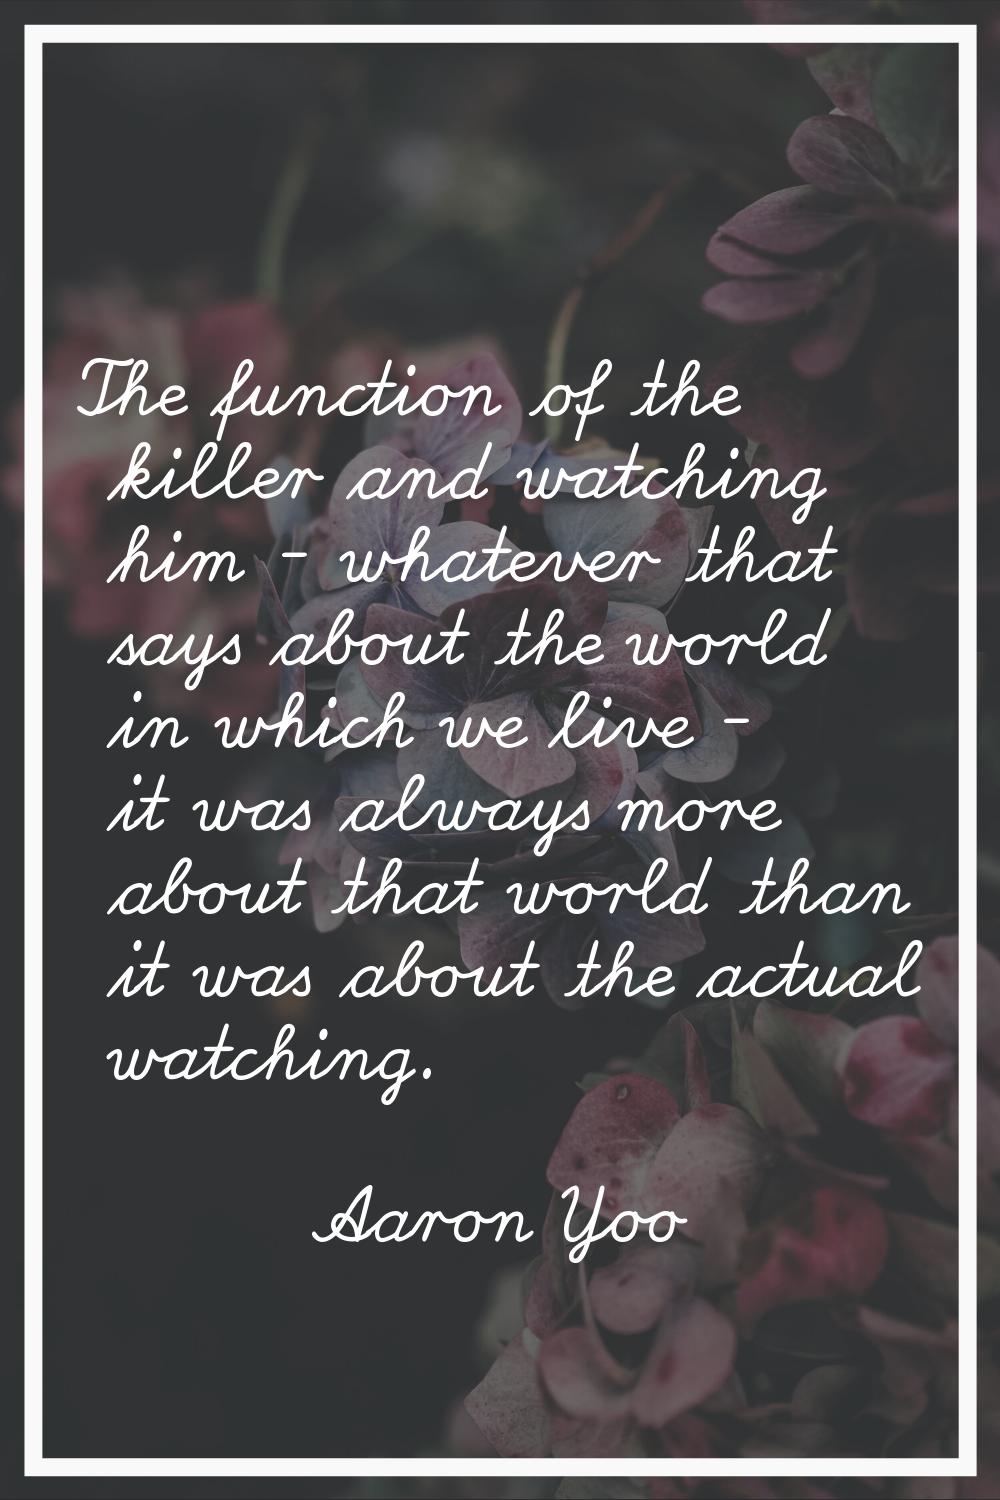 The function of the killer and watching him - whatever that says about the world in which we live -